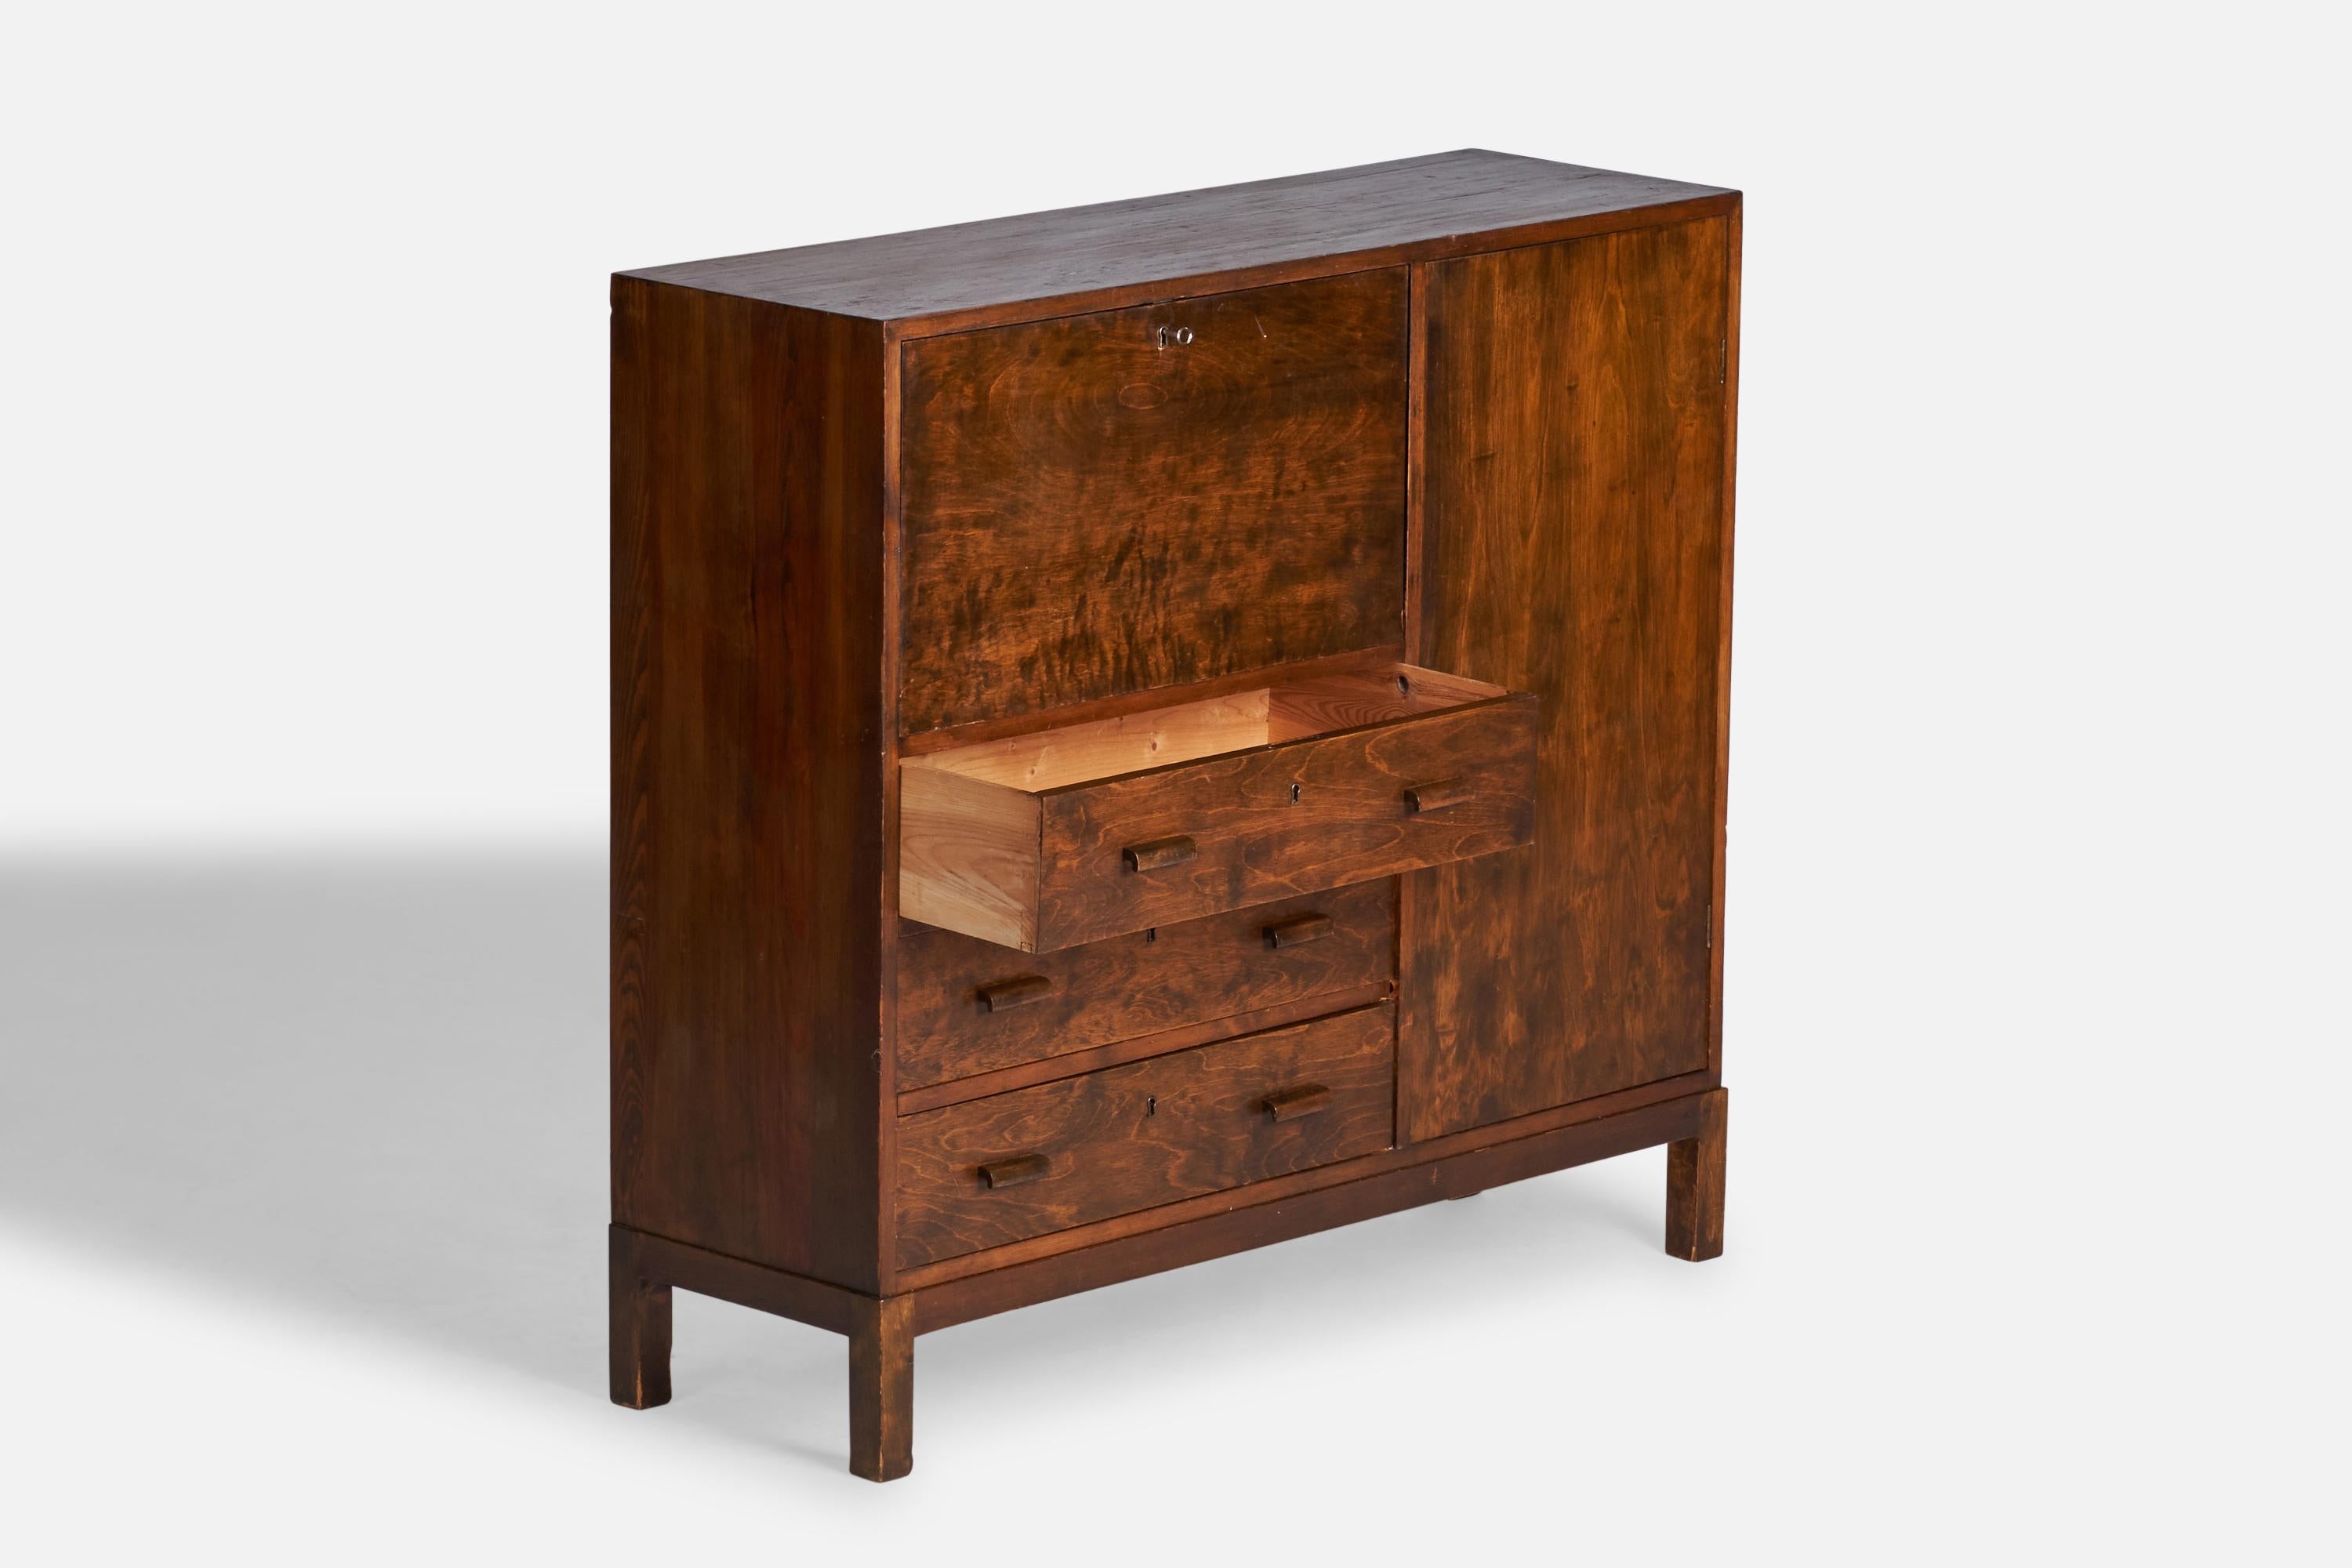 A dark-stained birch cabinet designed and produced in Sweden, 1930s.